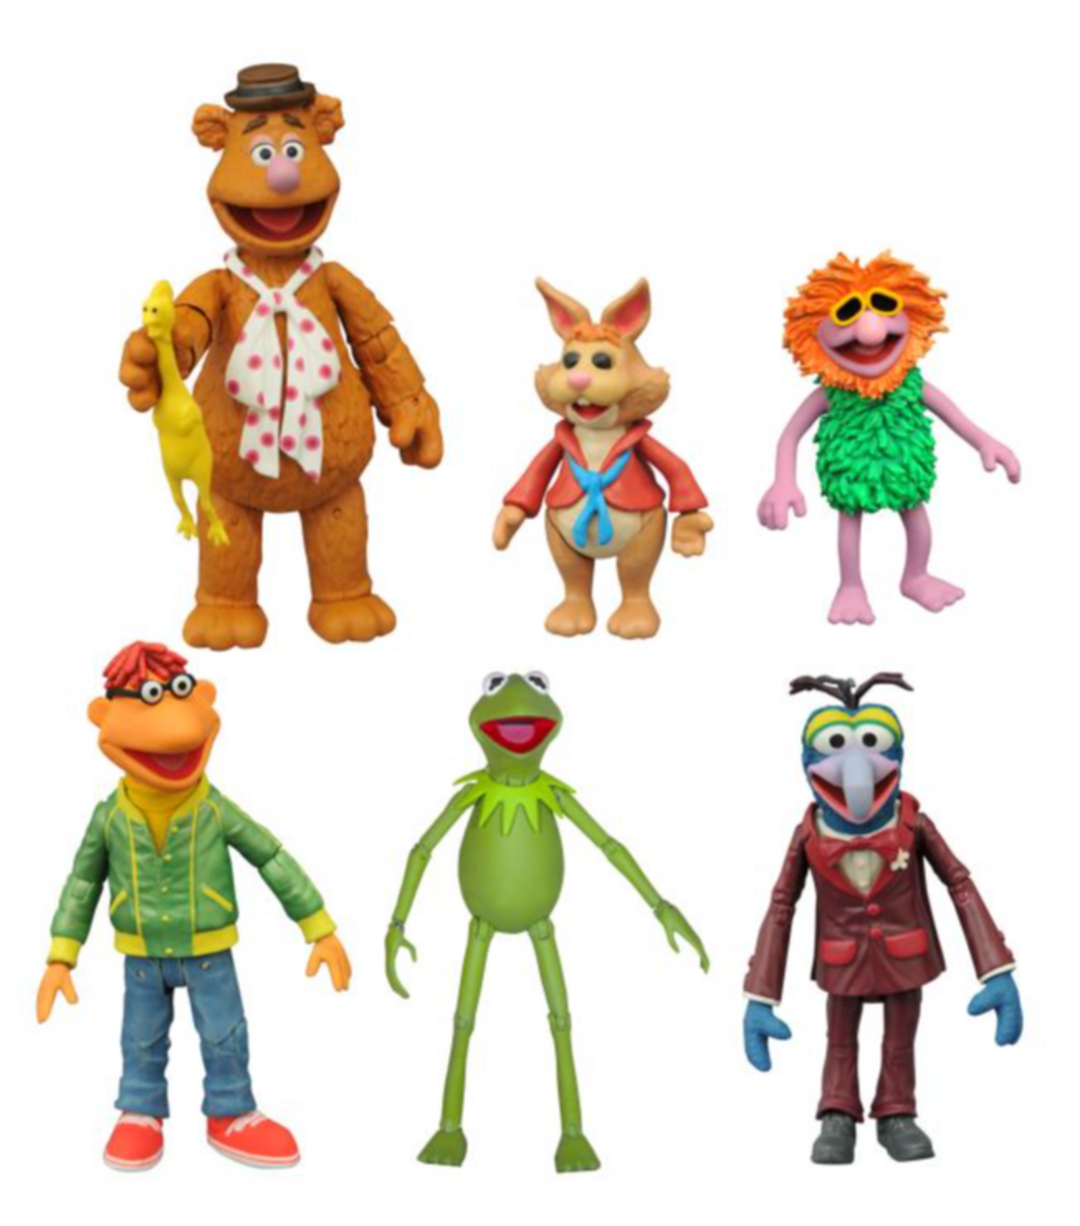 The Muppet Show Backstage Deluxe Figure Box Set